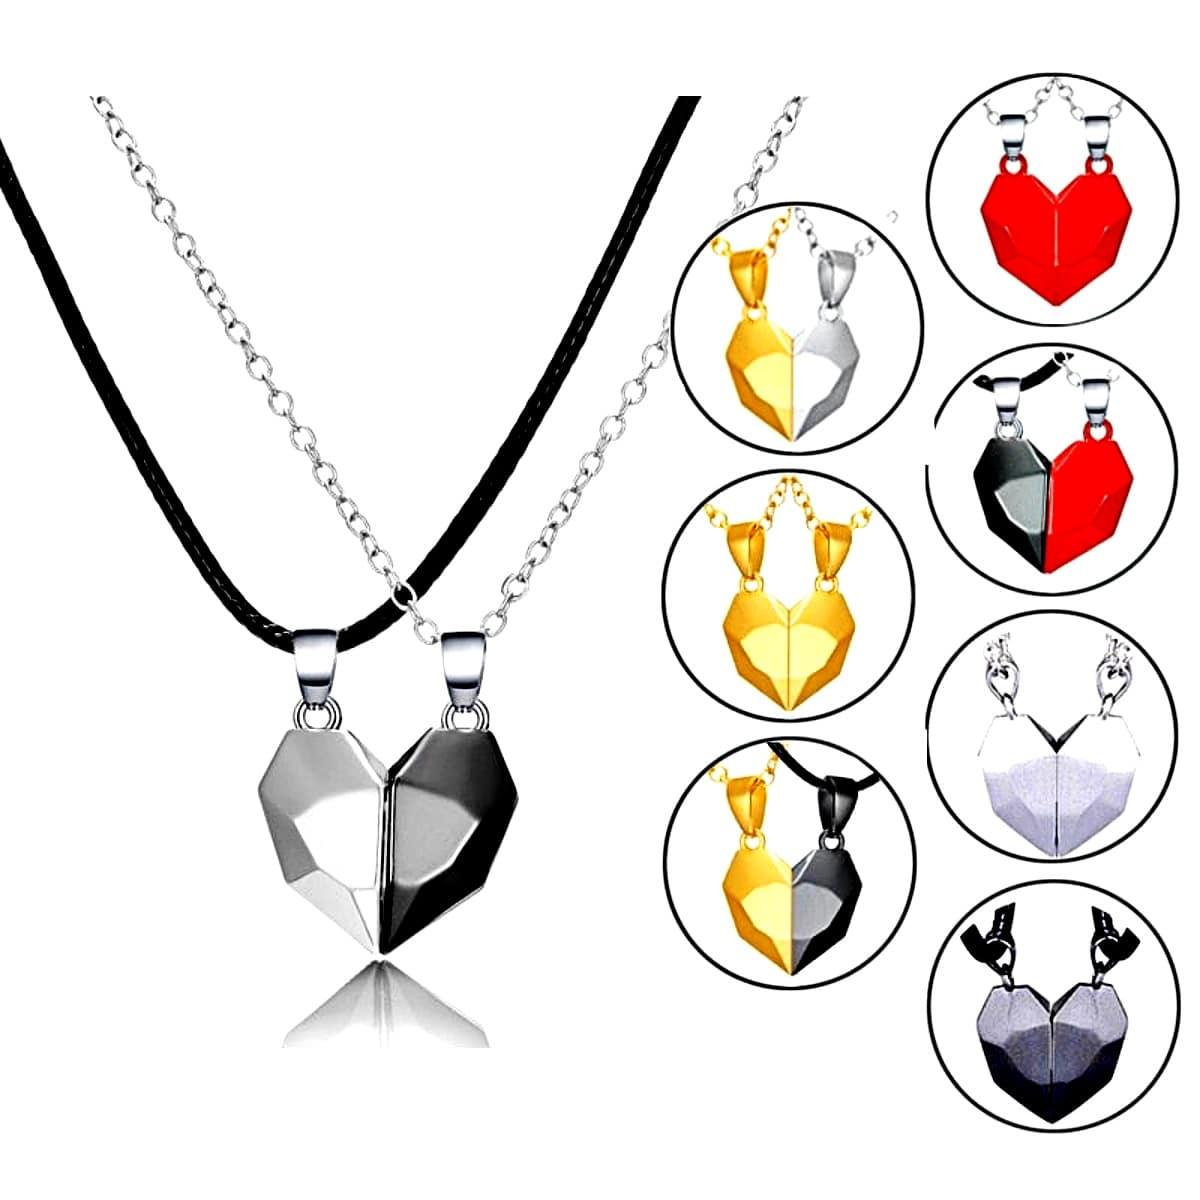 2 Pcs Love Heart Flame Pendant Necklace Adjustable 22k Gold Plated Neck  Jewelry Fashion Jewelry For Wife, Shop The Latest Trends